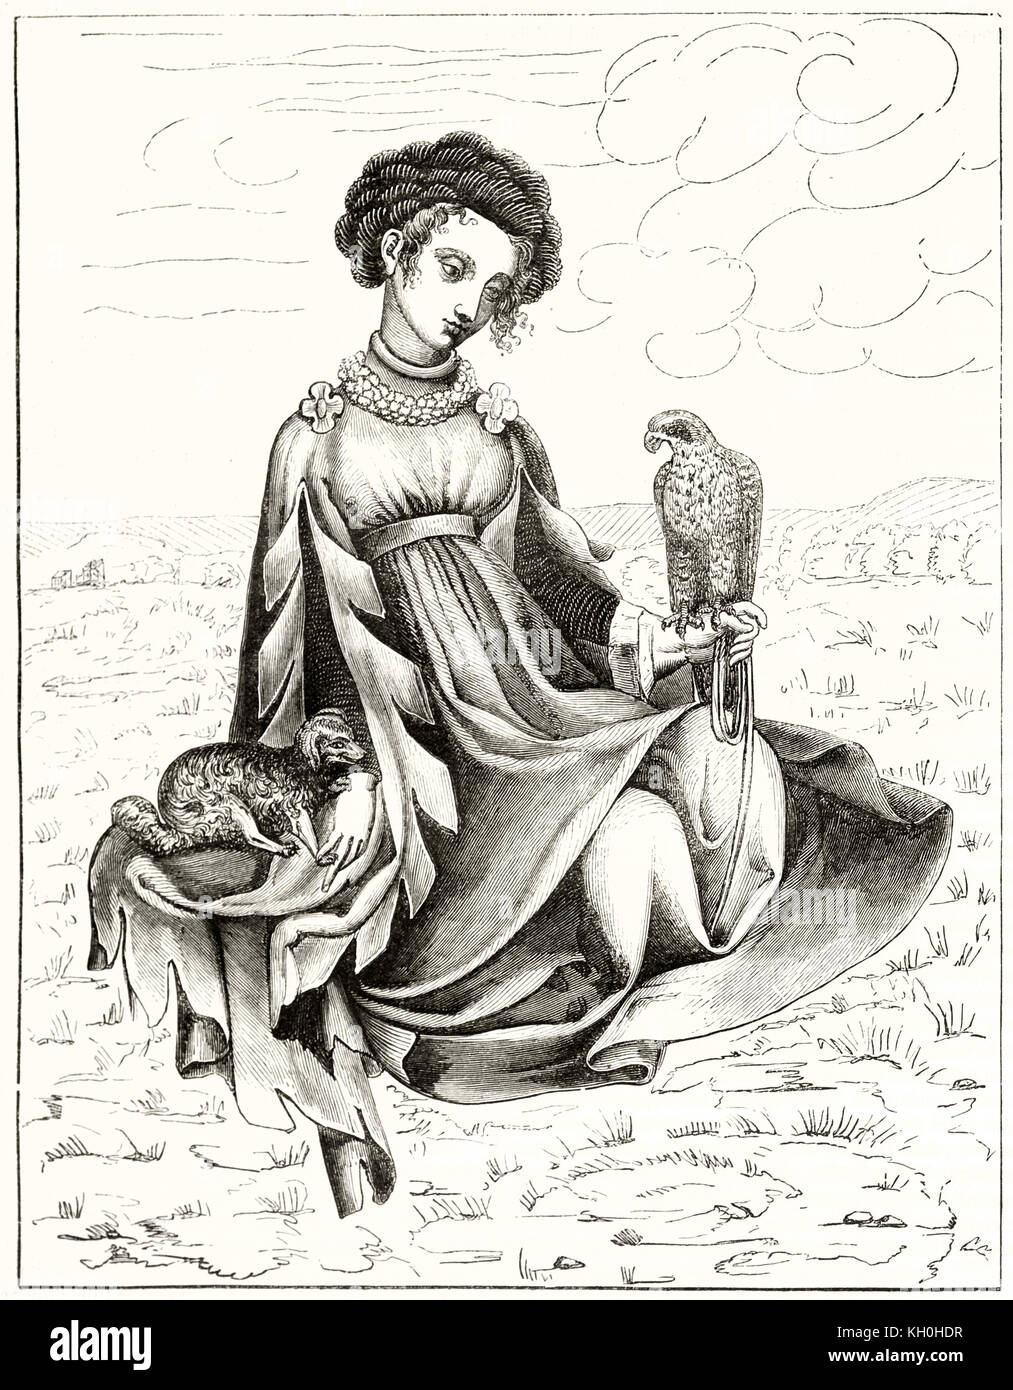 Old illustration depicting young noblewoman in Charles VI age. After Willemin, publ. on Magasin Pittoresque, Paris, 1847 Stock Photo